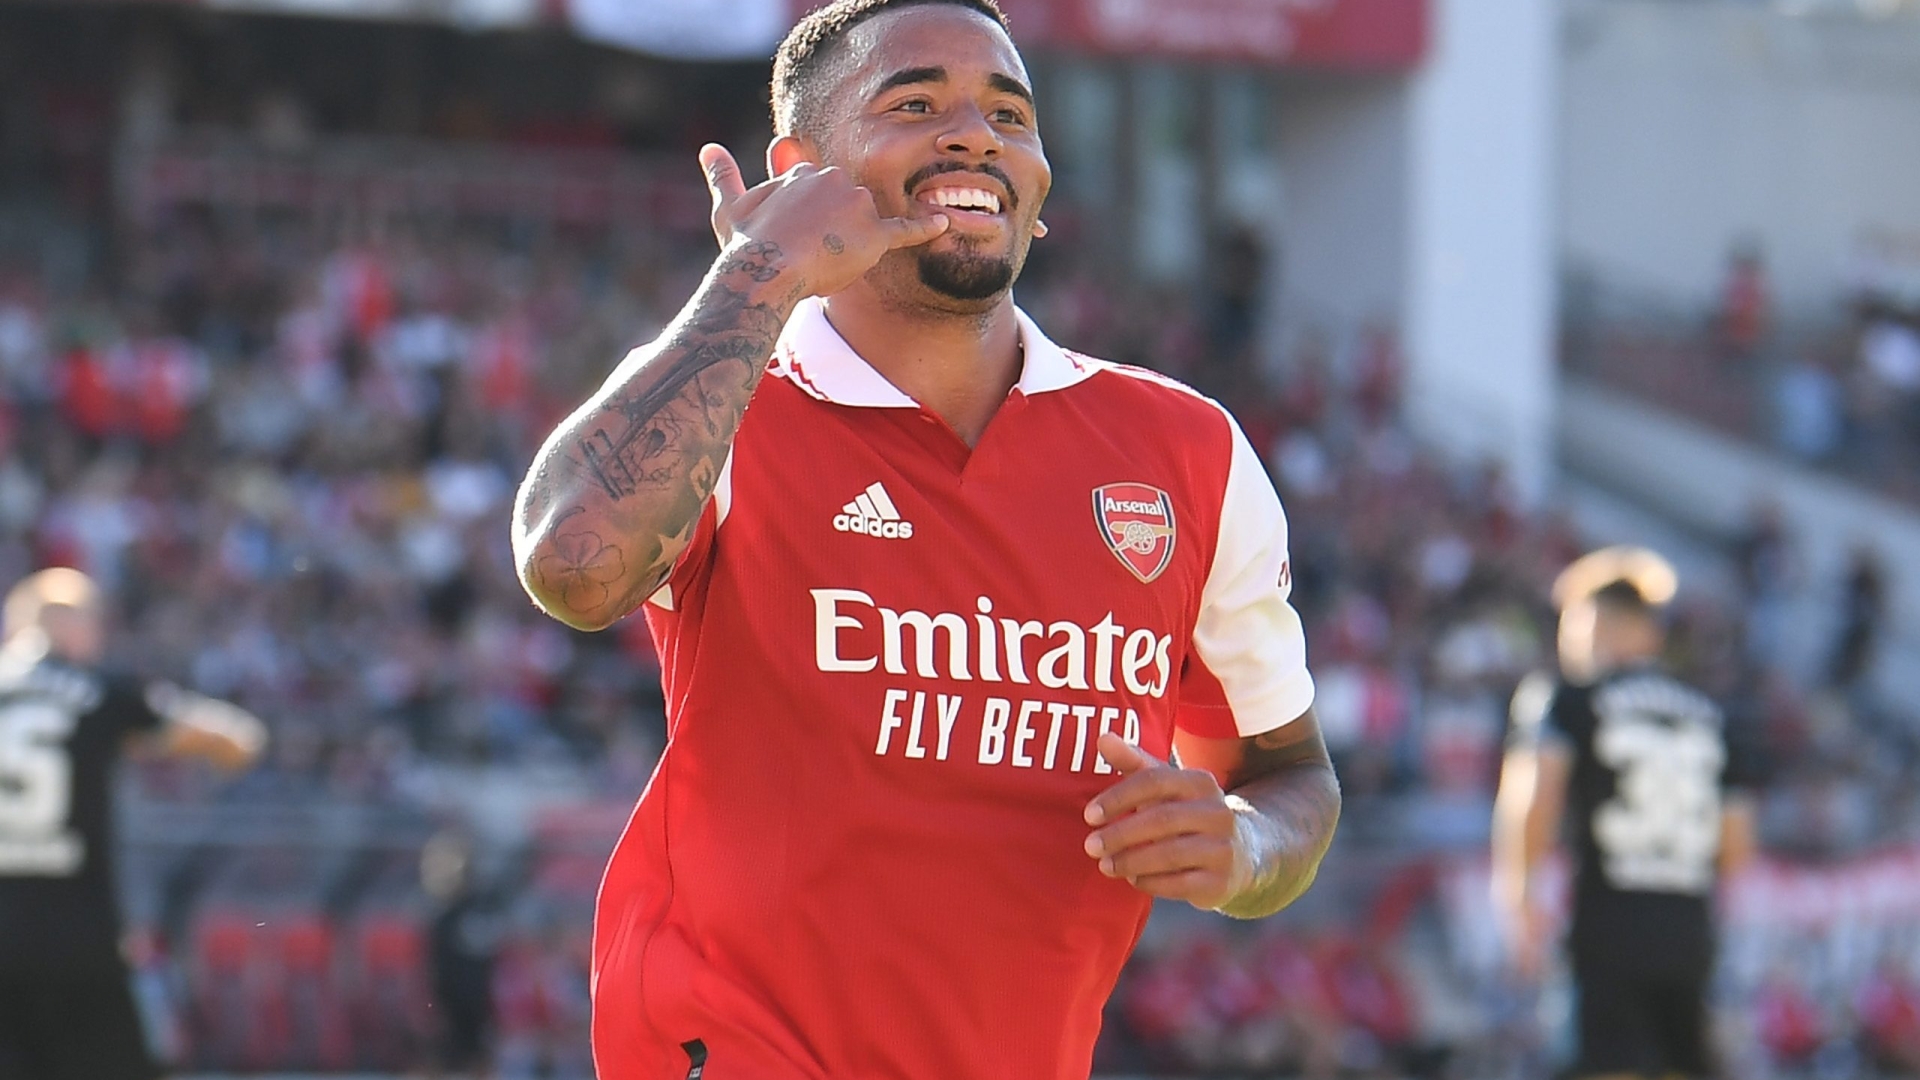 New Arsenal signing Gabriel Jesus explains when he will leave the Gunners following transfer from Manchester City as he explains Premier League aim